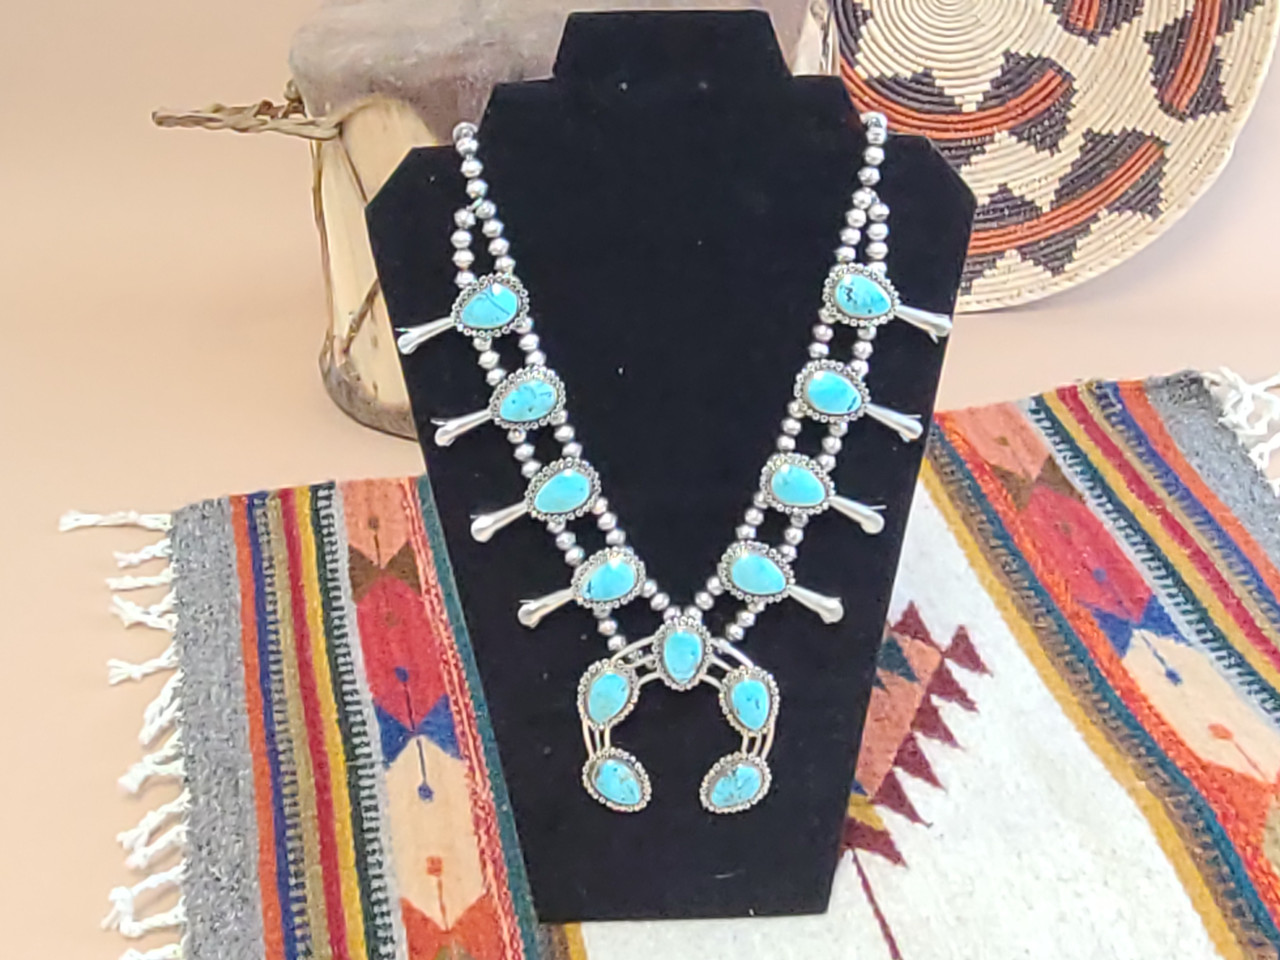 Vintage Navajo Squash Blossom Necklace Sterling Silver & Turquoise: Signed  CHOEN